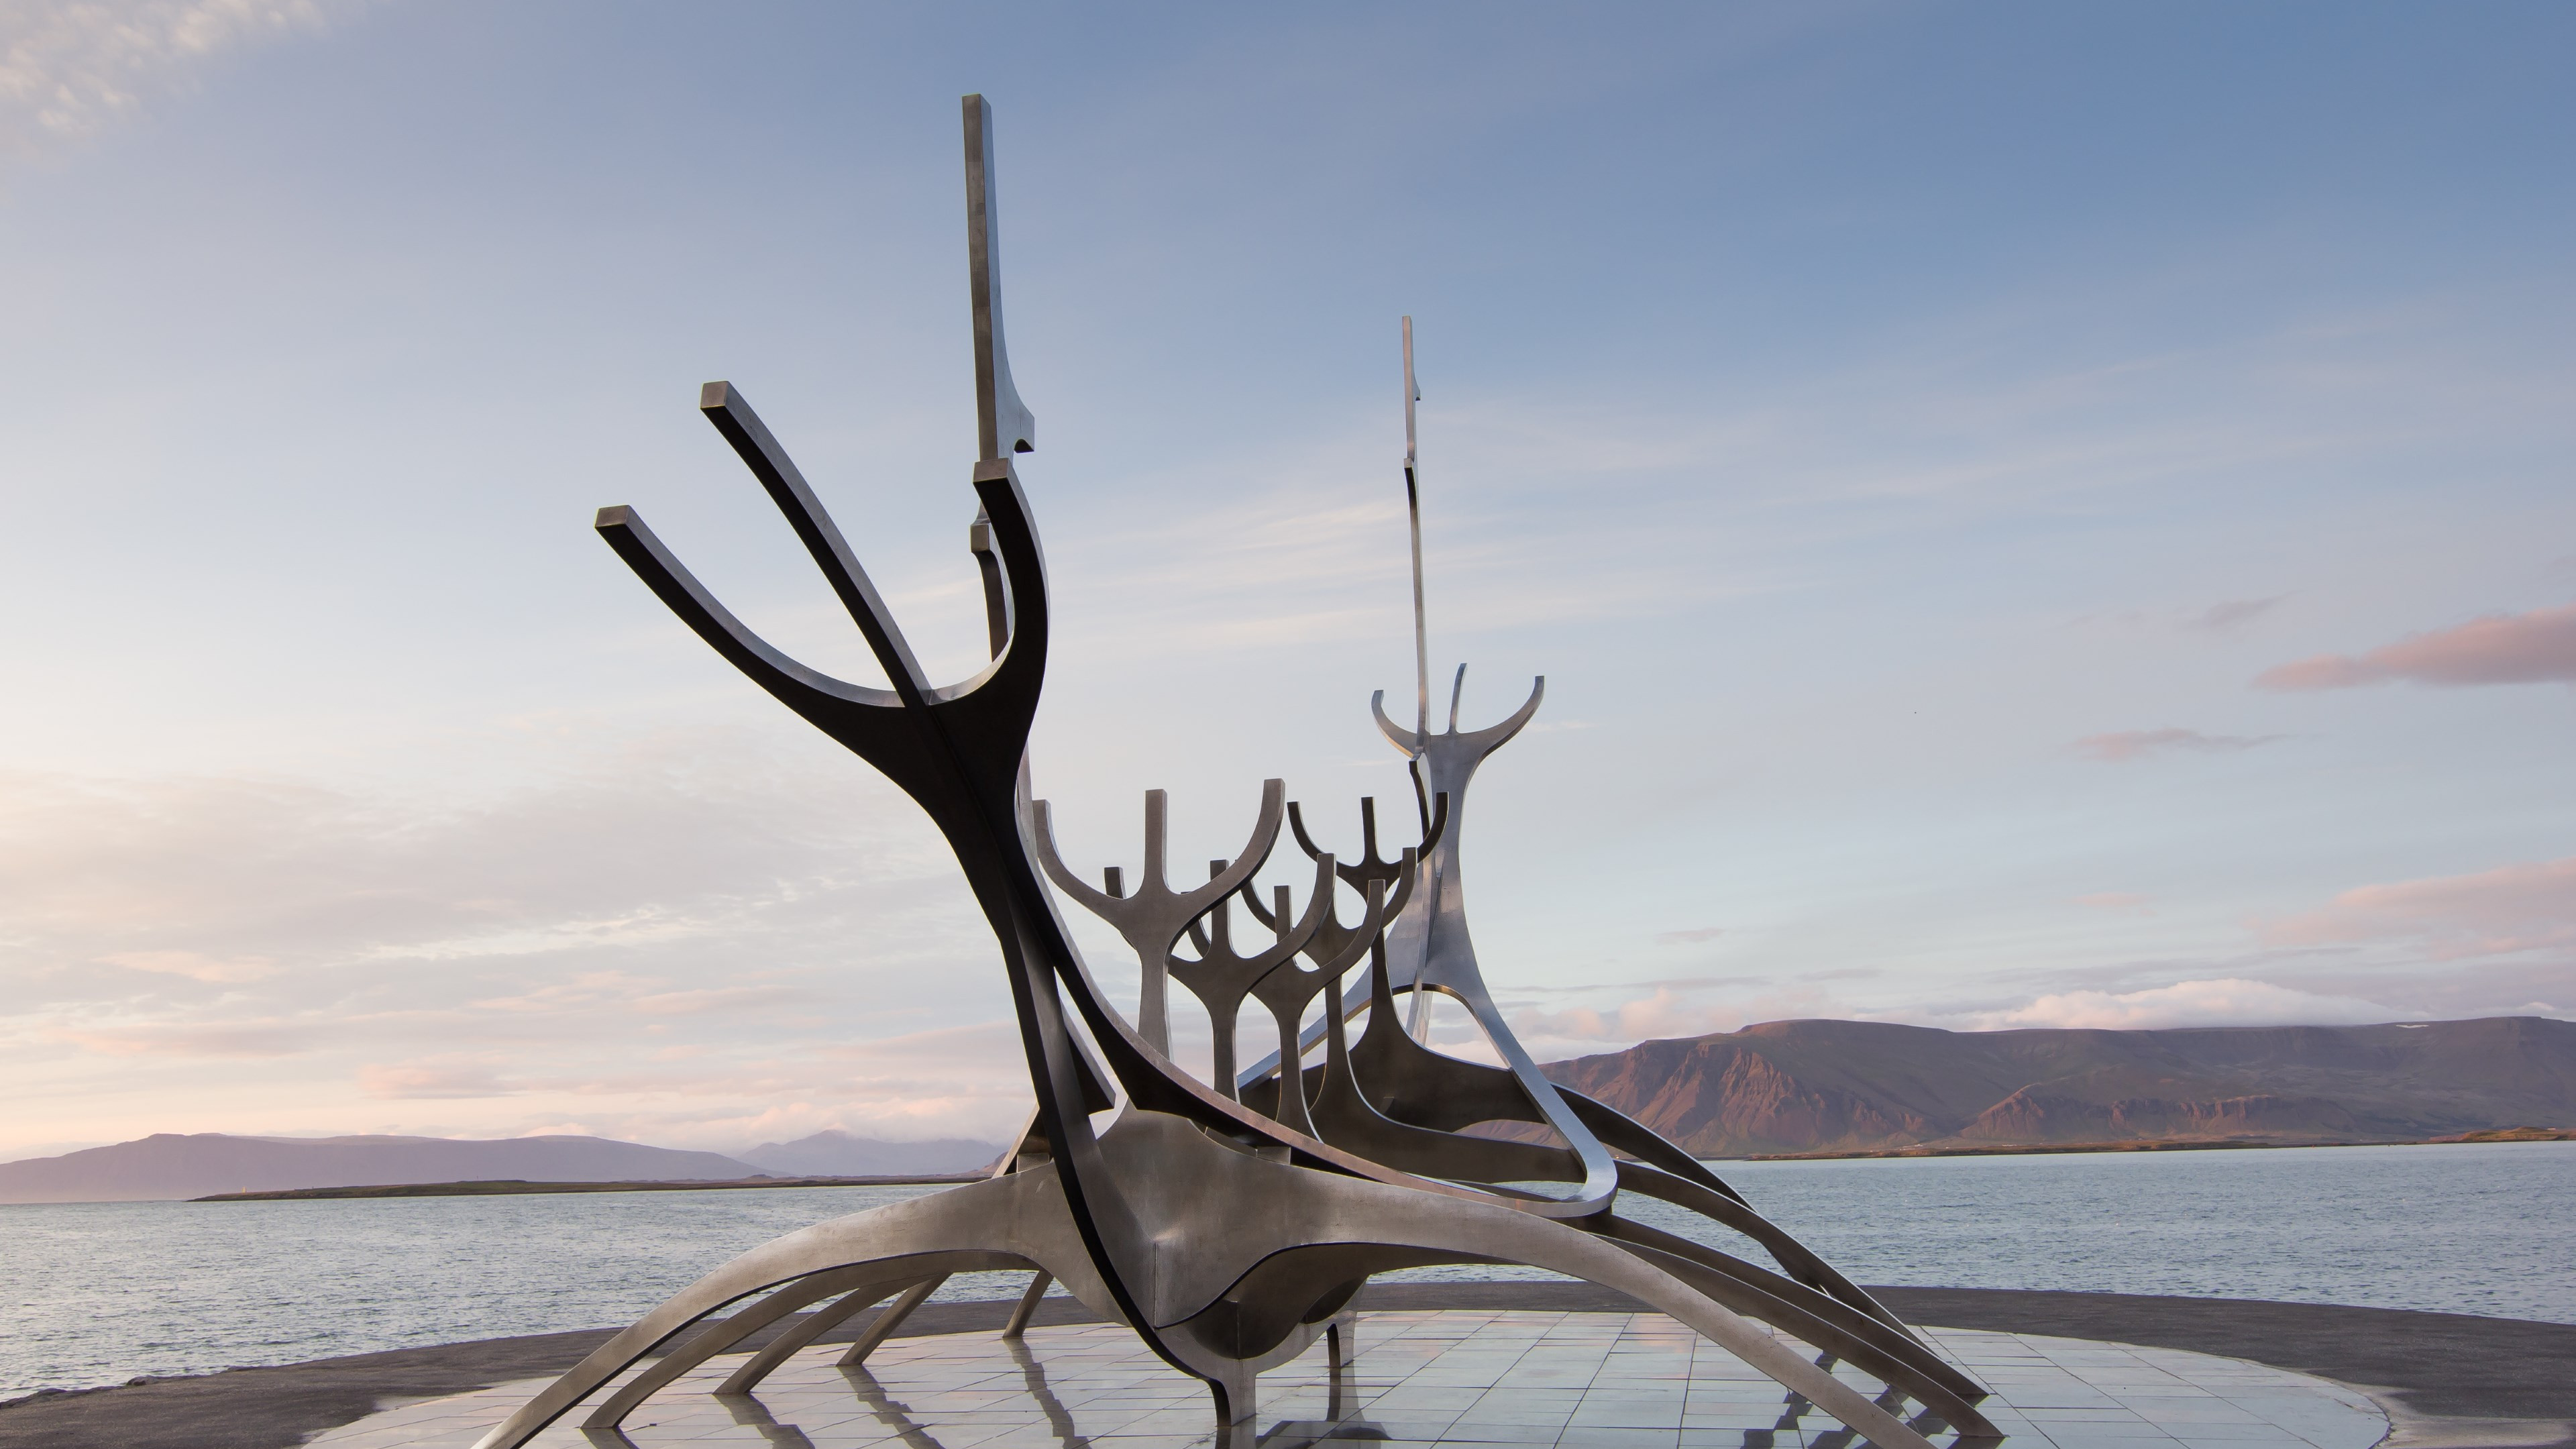 The Sun Voyager from Reykjavik, Iceland wallpaper 3840x2160